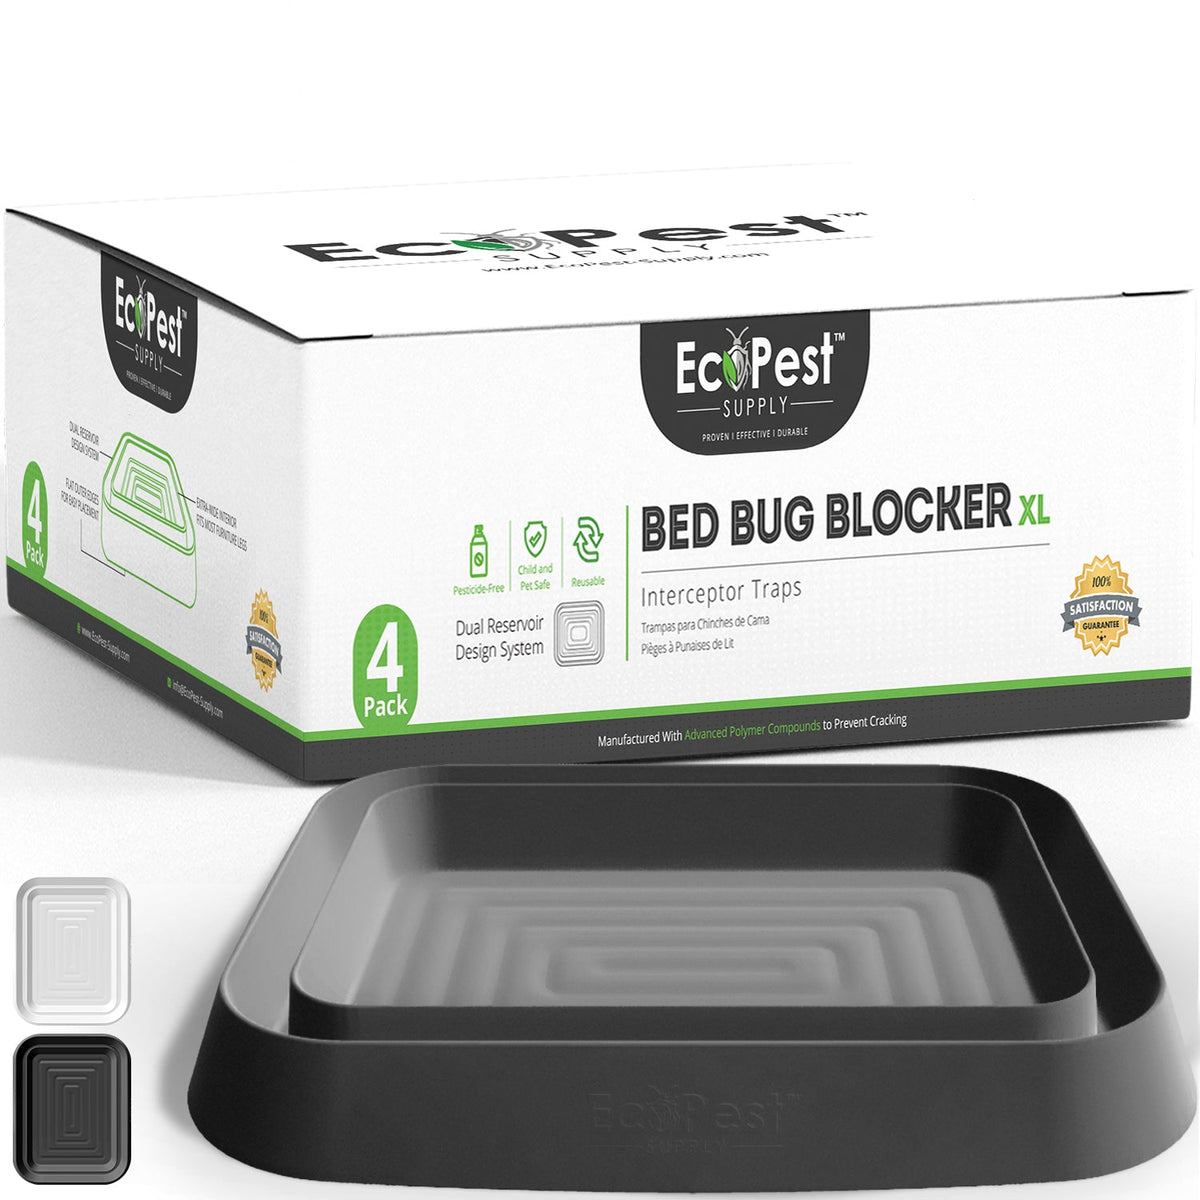 Bed Bug Blocker (XL) — 4 Pack | Interceptors, Monitors, and Traps by EcoPest Supply